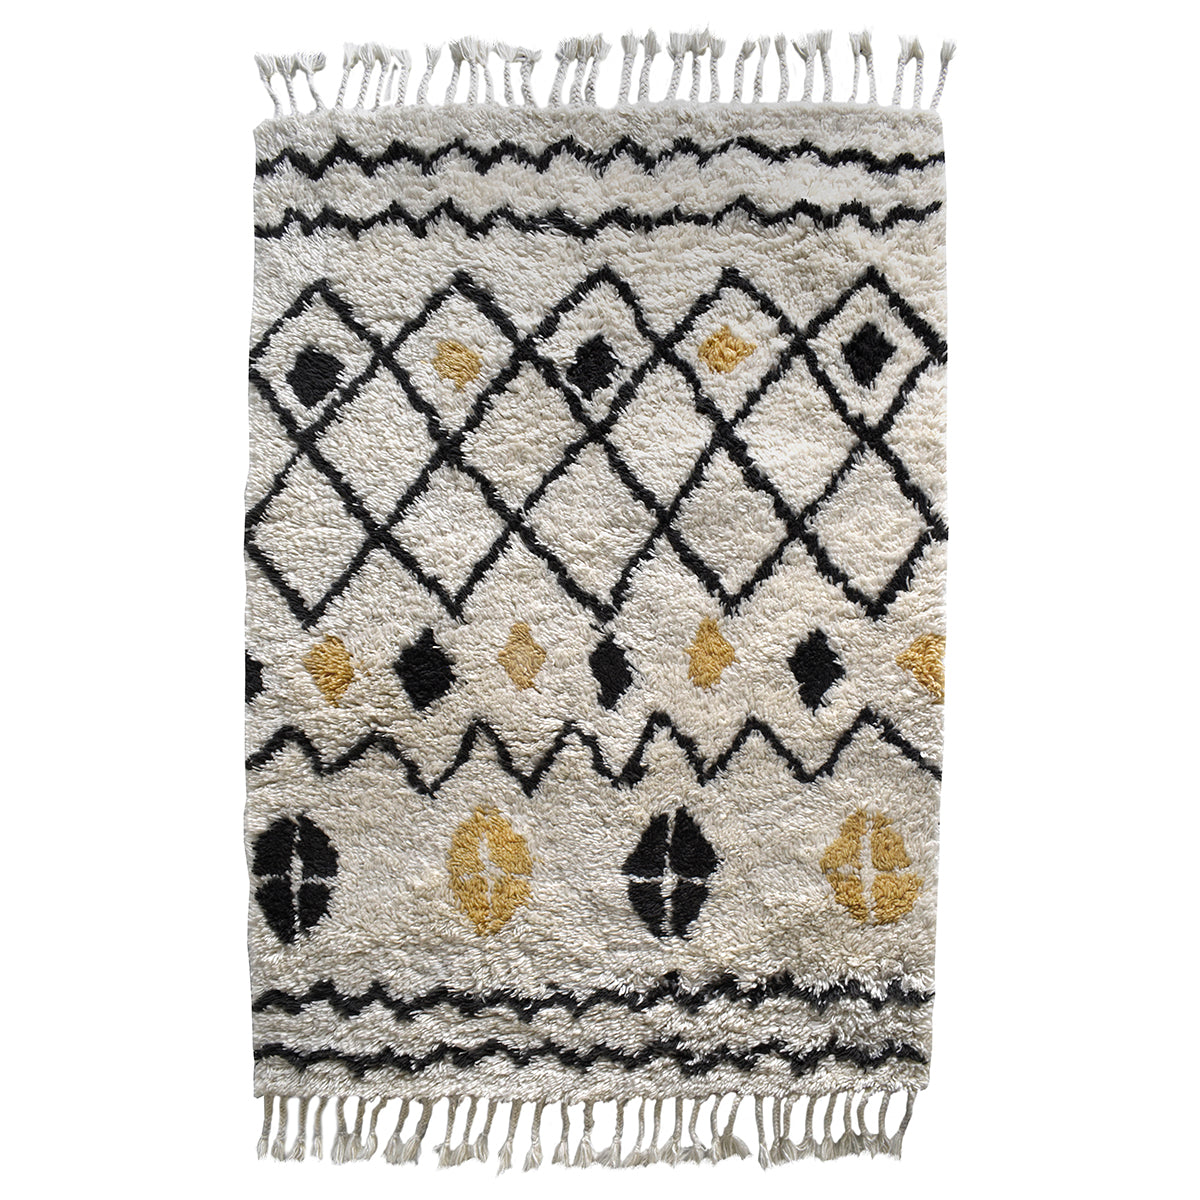 Load image into Gallery viewer, A black, yellow and white Navaho Rug 1200x1700mm with fringes perfect for interior decor from Kikiathome.co.uk.
